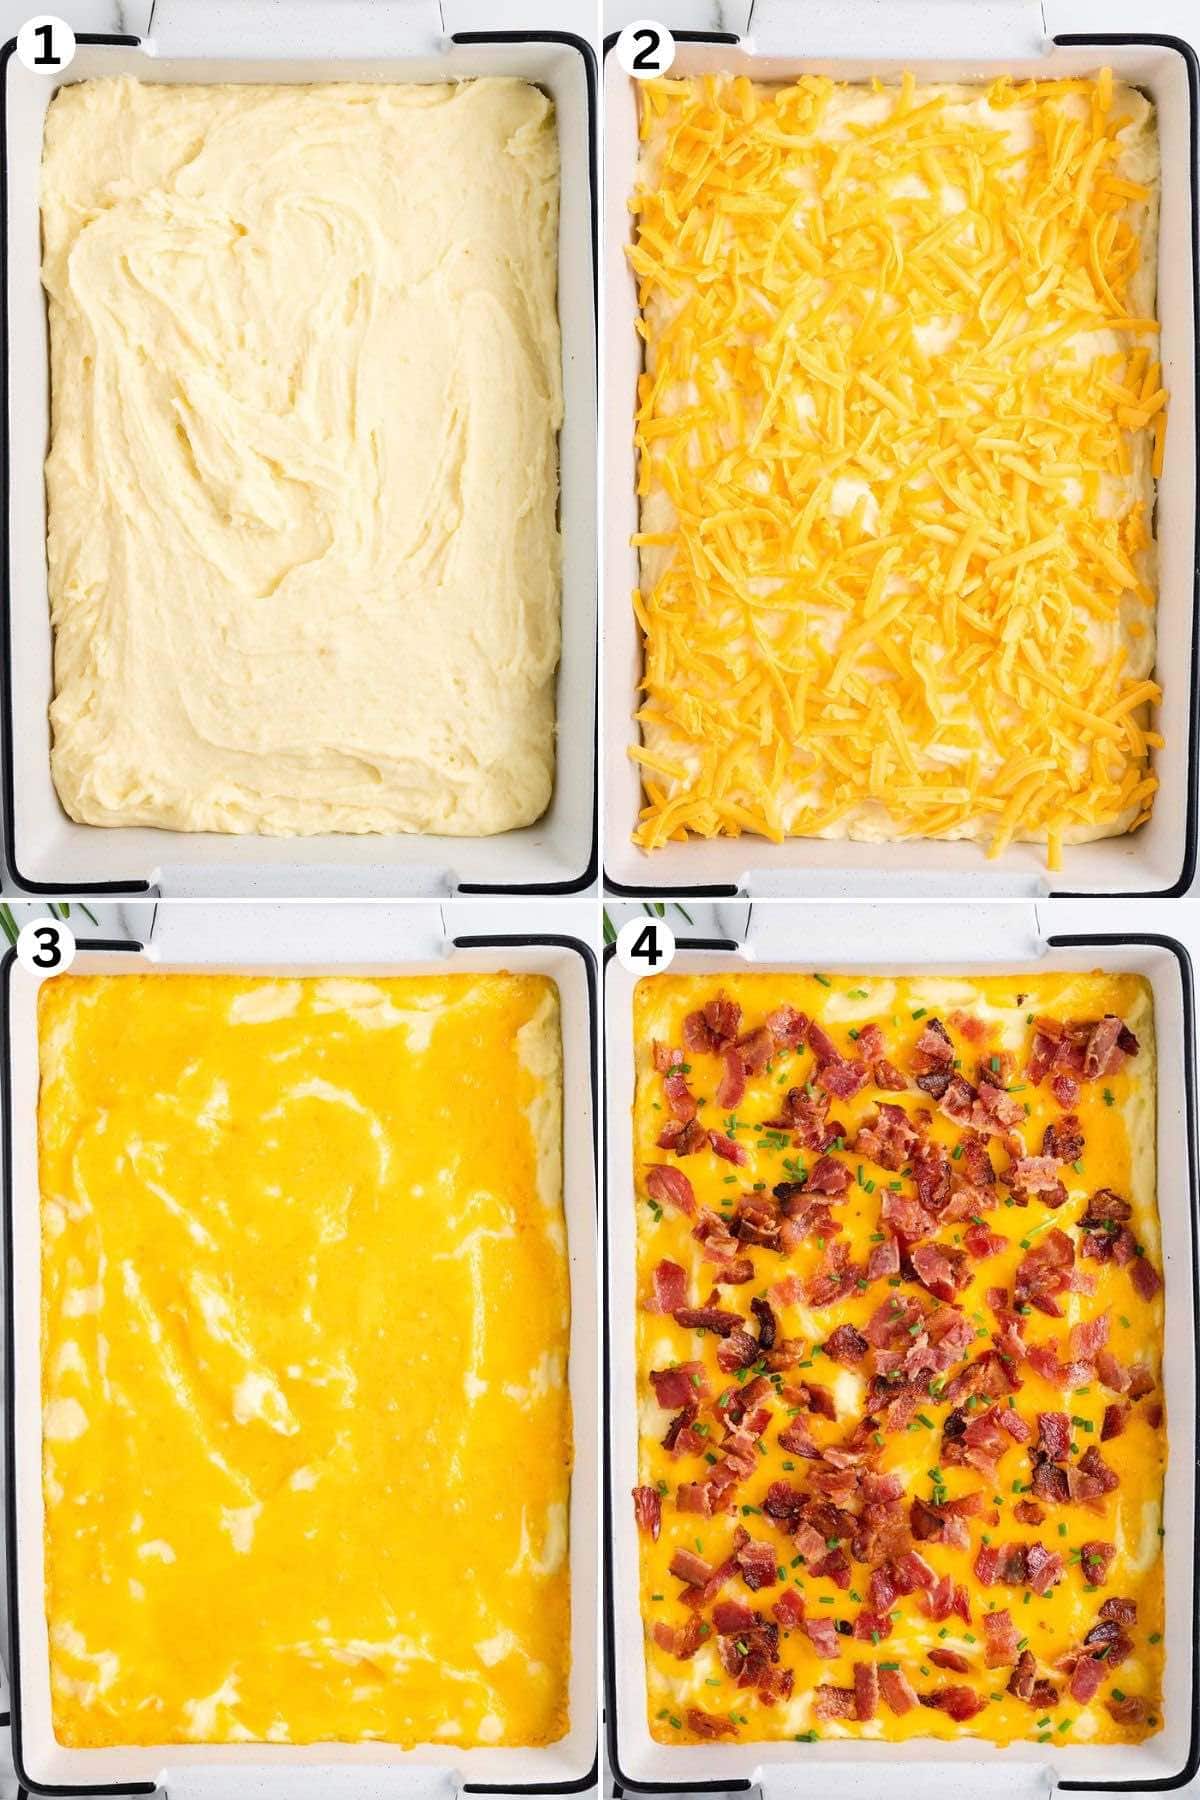 mashed potato mixture in a casserole dish. adding cheese on top of the mixture. baked mashed potato with bacon on top.